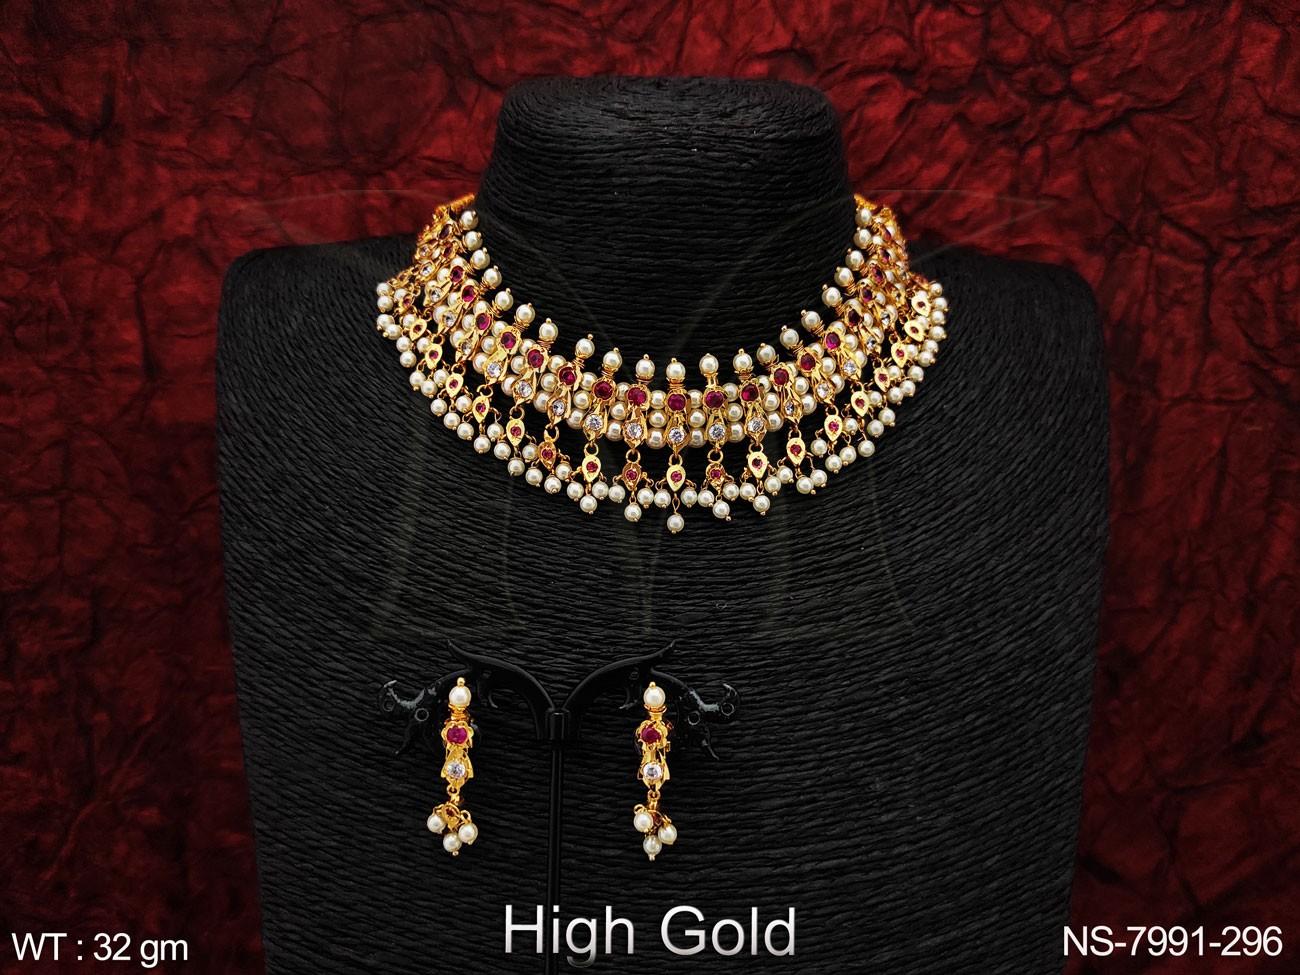 Silver Designer Chokers Online Shopping for Women at Low Prices